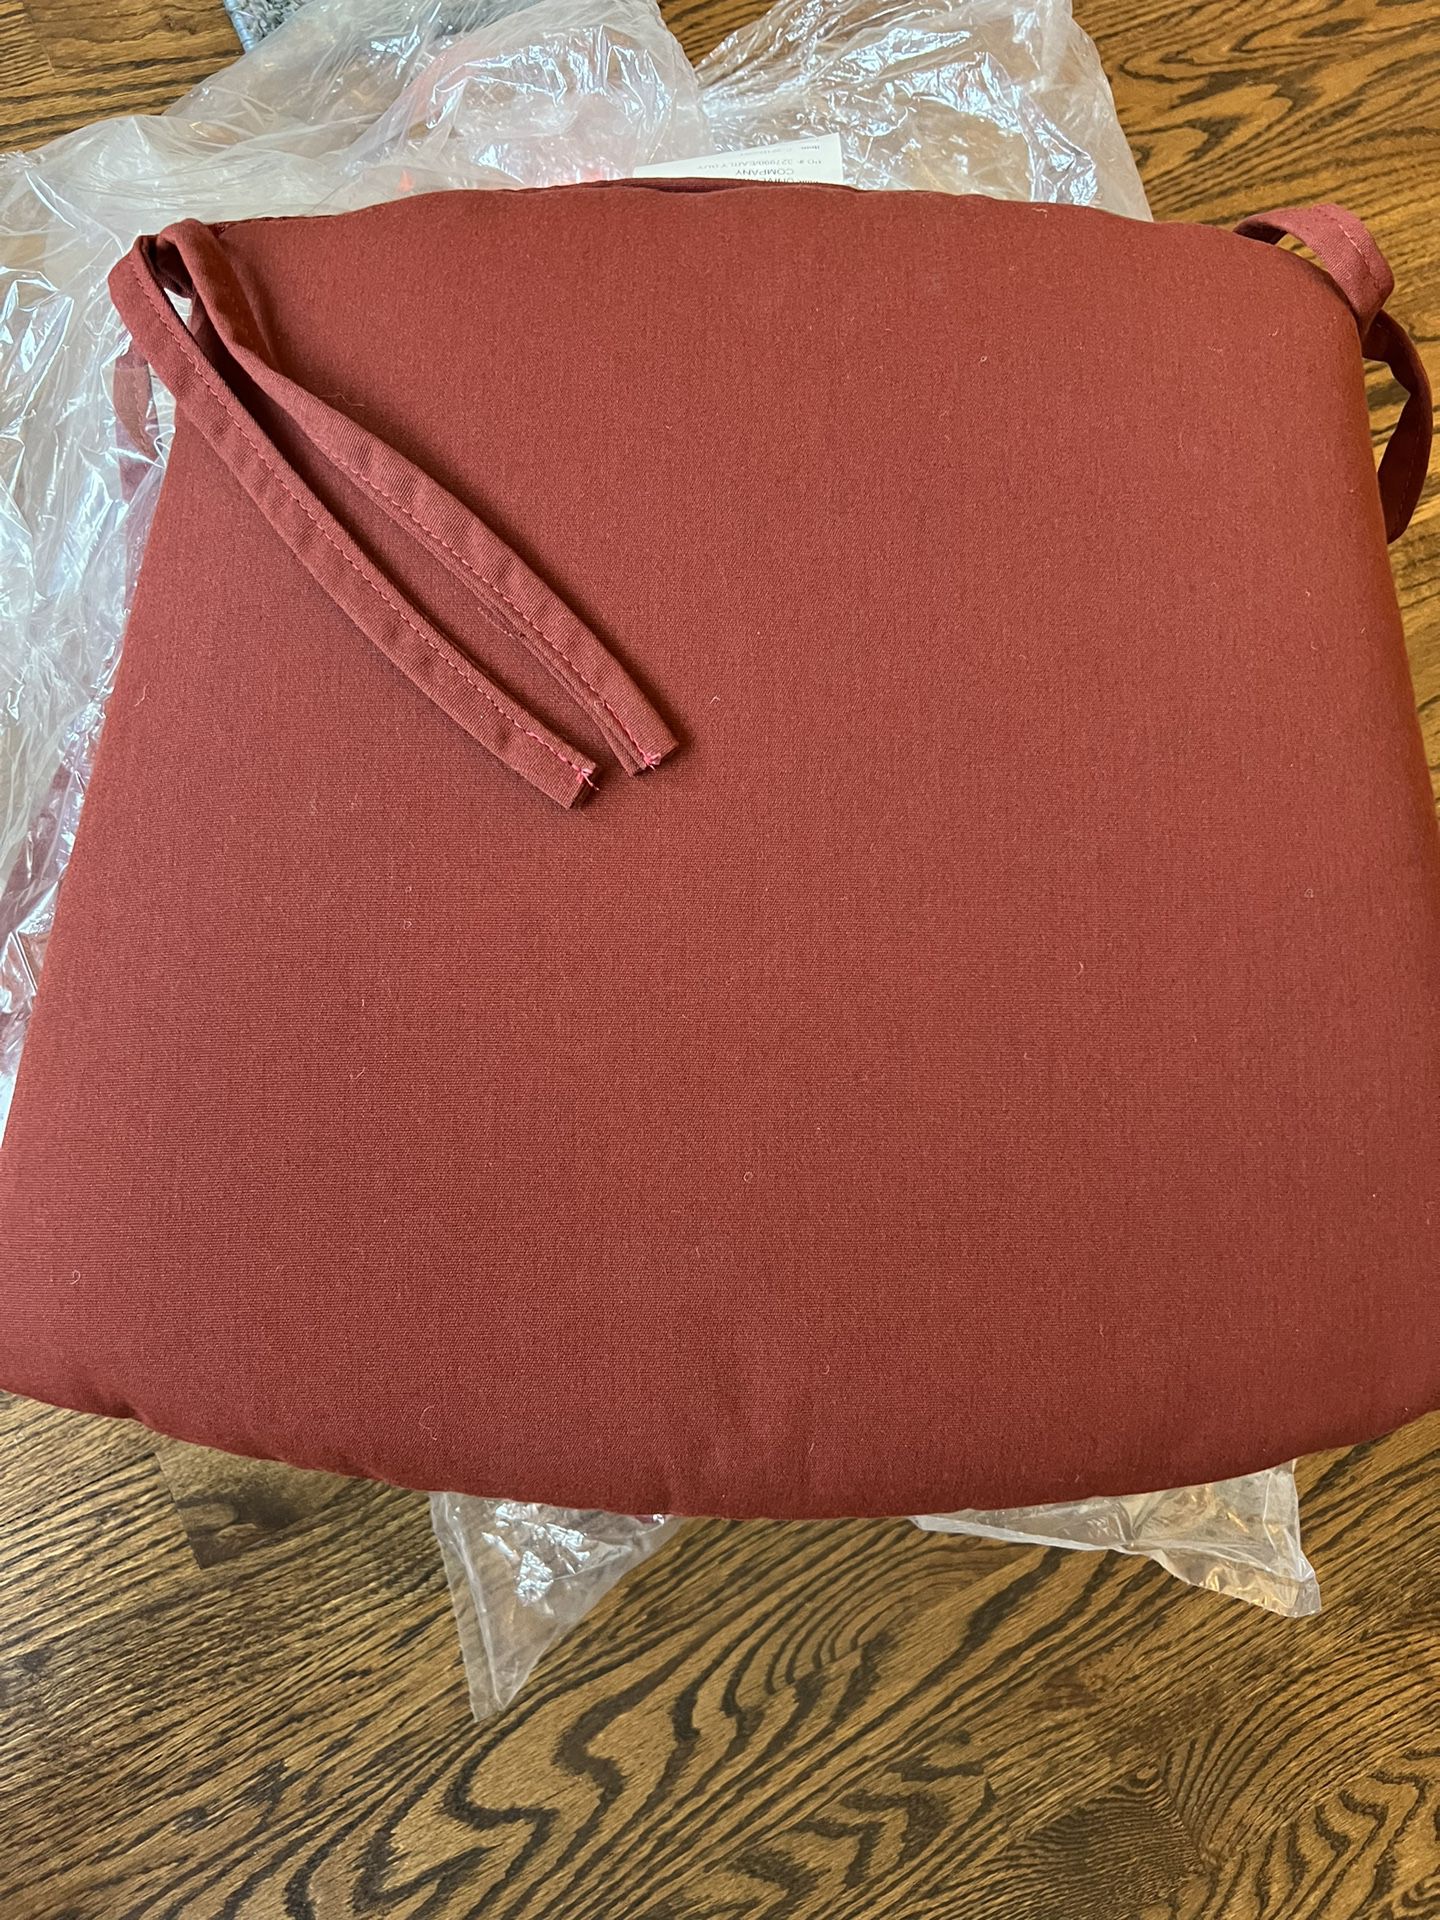 Outdoor Seat Cushions - NEW 4 Total